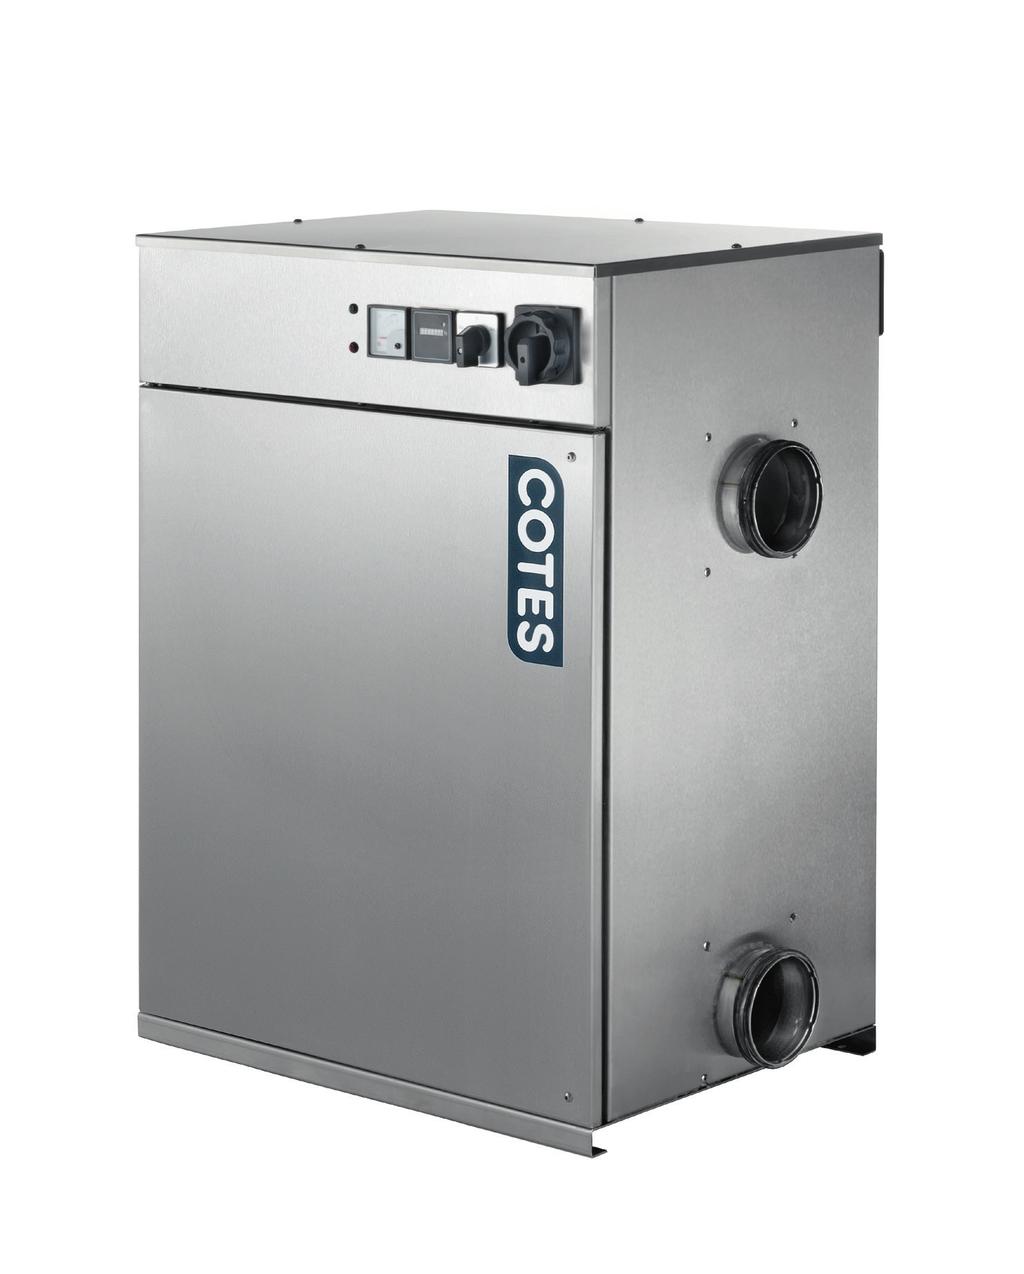 COTES ALL-ROUND THE C30-RANGE IDEAL FOR USE IN Food industry processing facilities Cold stores Waterworks General humidity management in all kinds of indoor spaces ADVANTAGES Small measurements